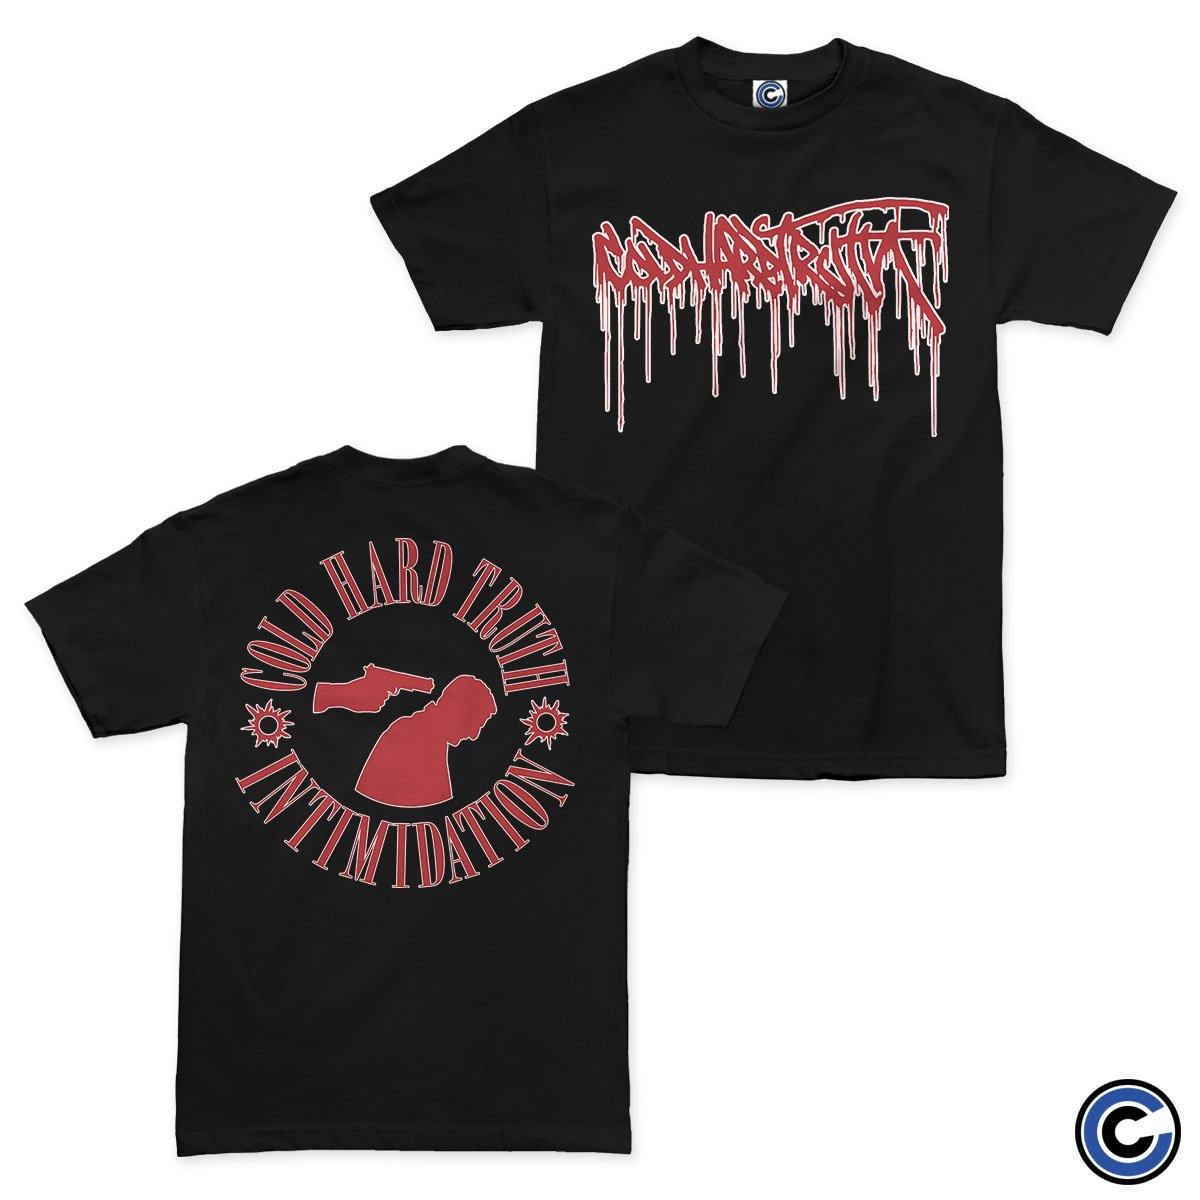 Buy – Cold Hard Truth "Intimidation" Shirt – Band & Music Merch – Cold Cuts Merch